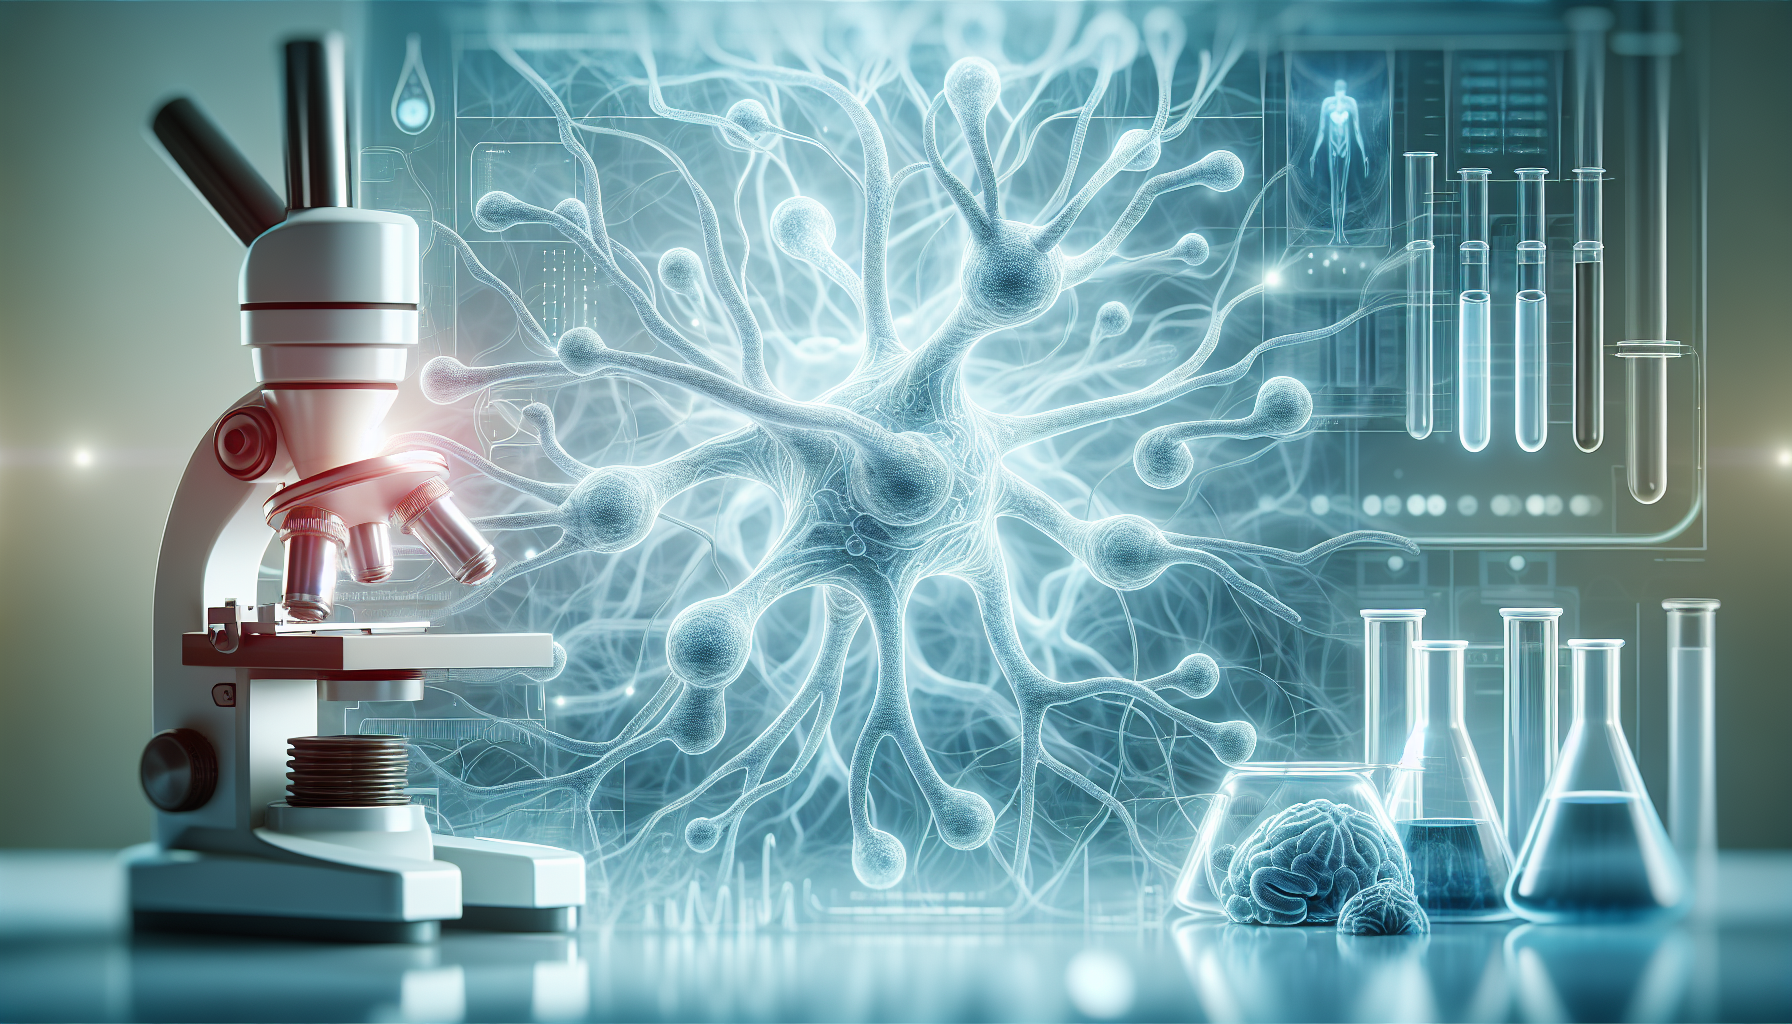 Illustration of nerve cells and brain cells in a clinical trial setting